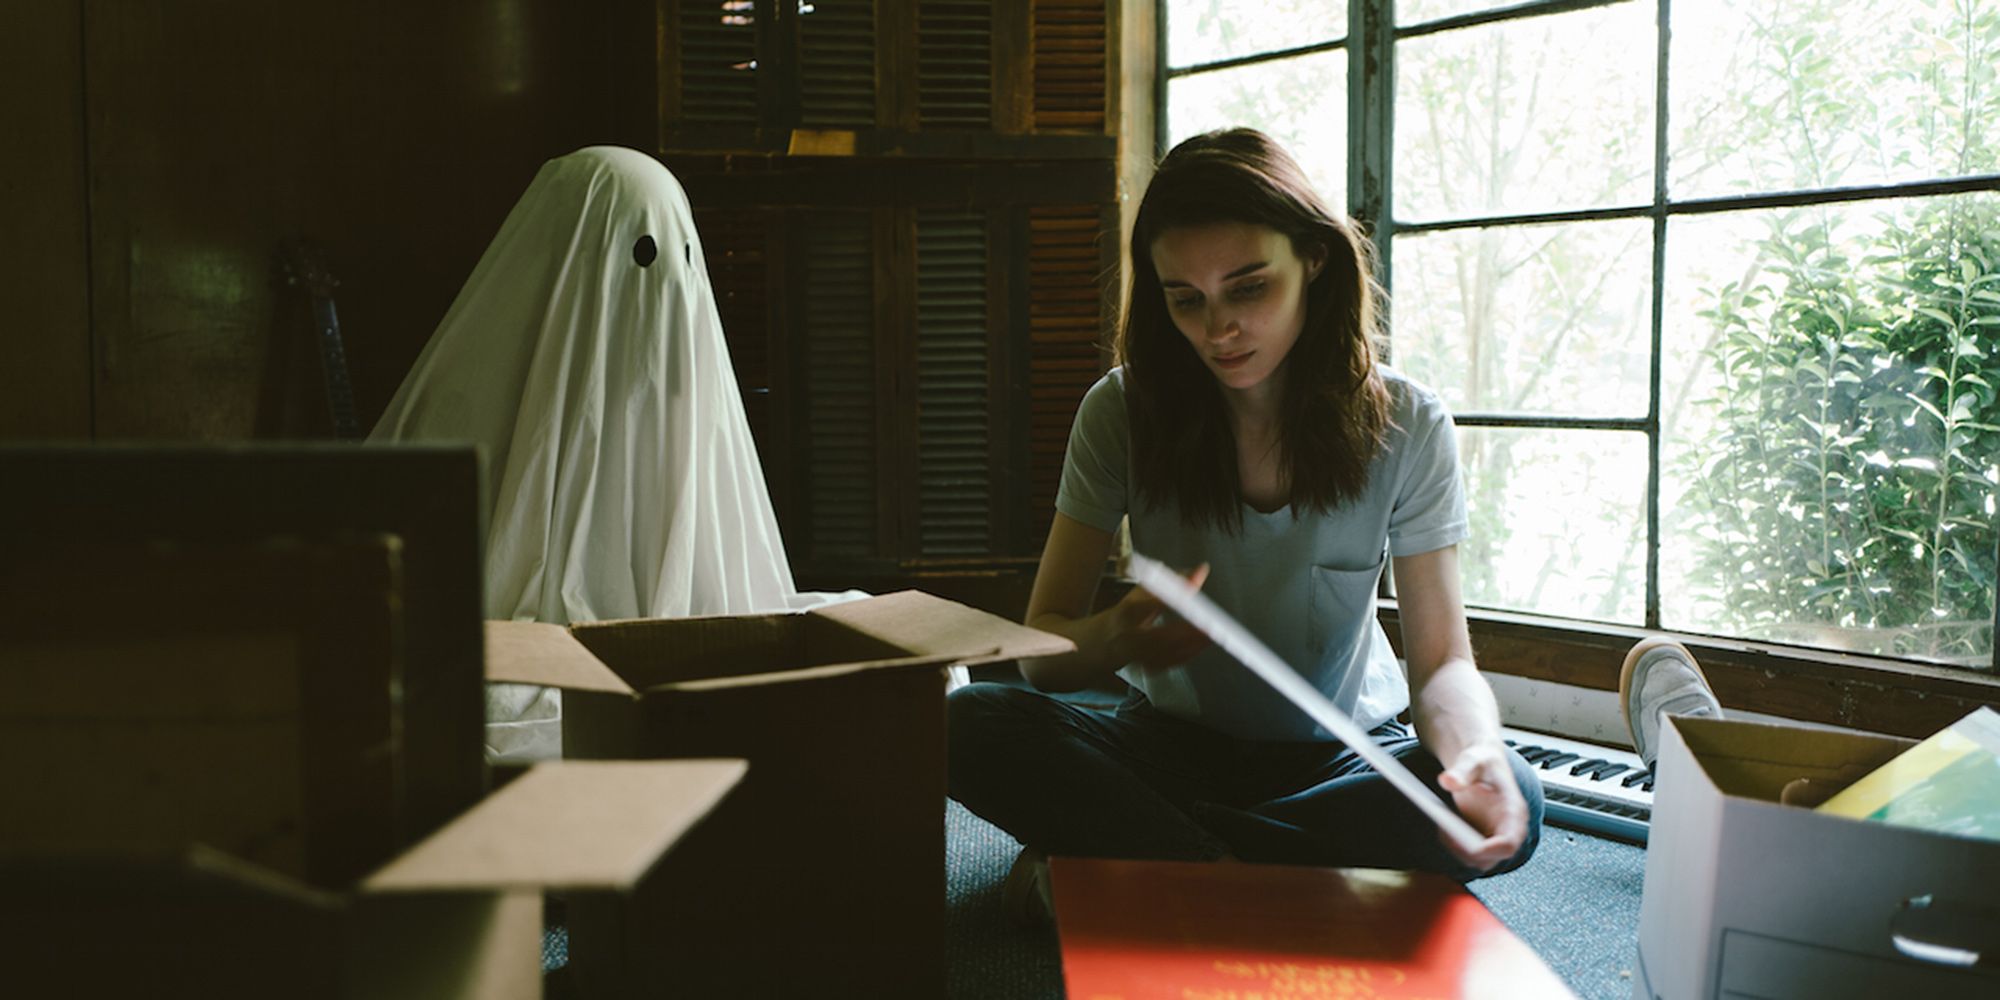 M reading a book while M stands behind her in A Ghost Story,